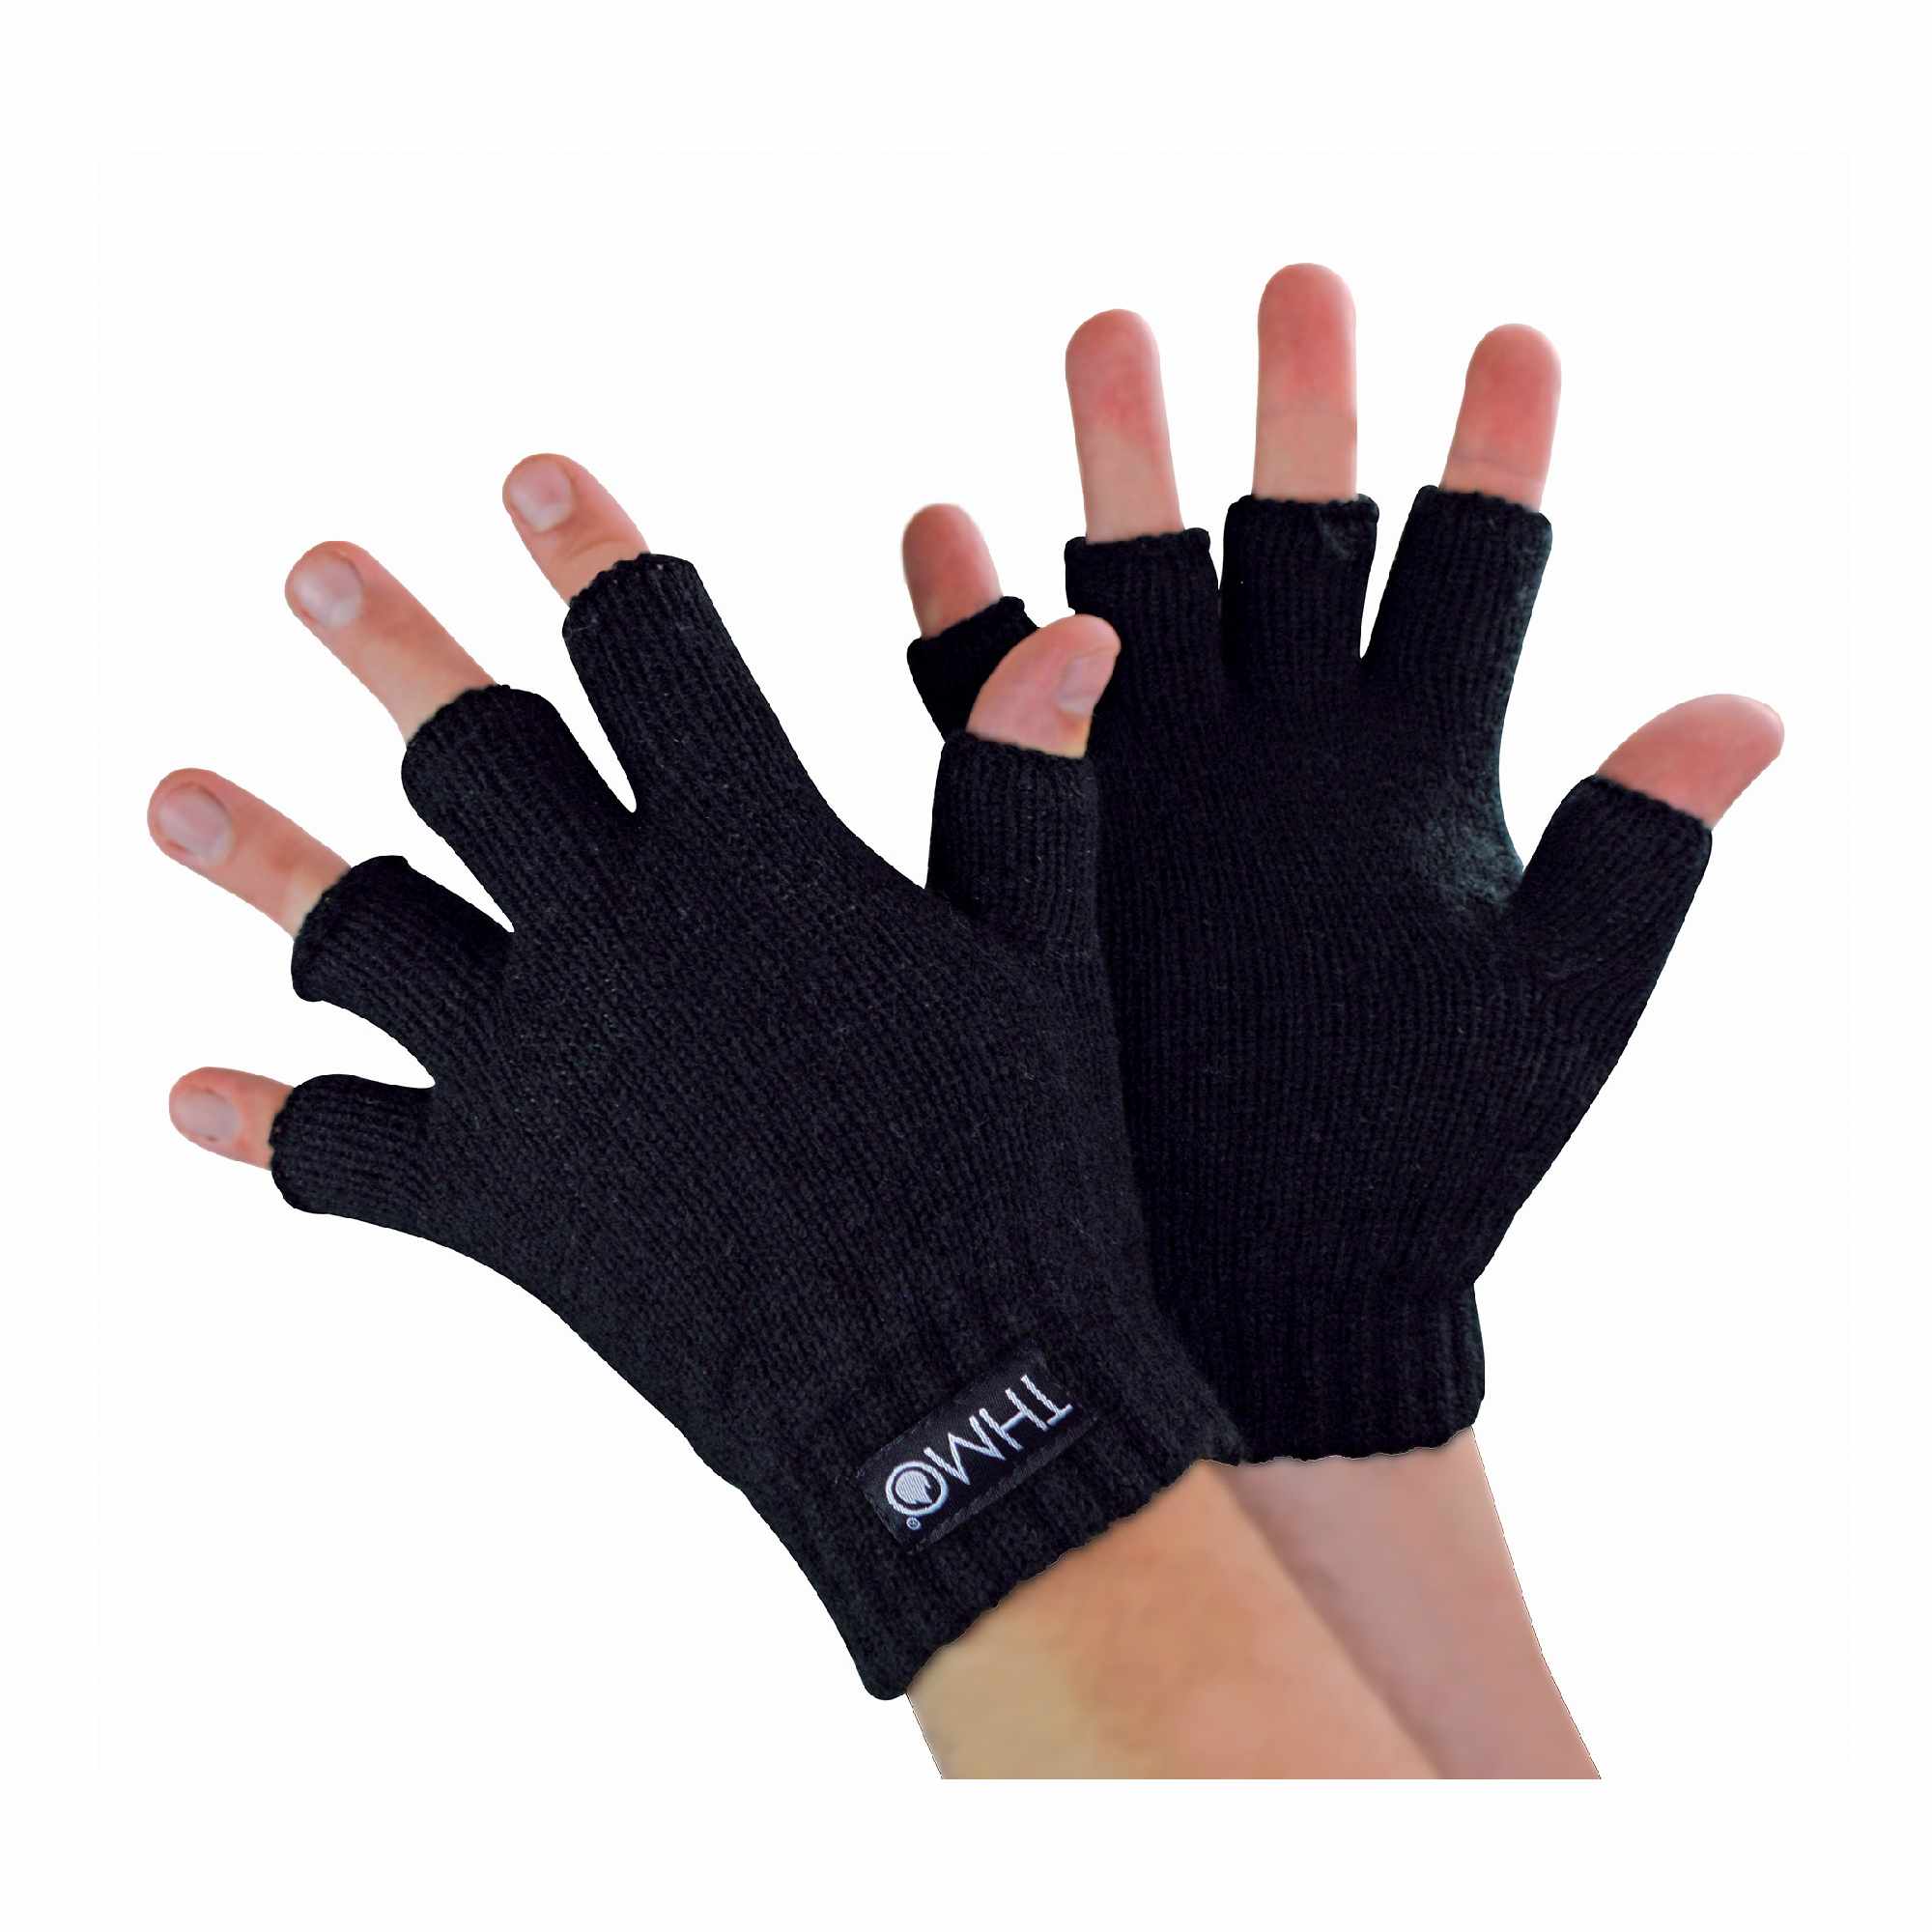 Kids Quality Thinsulate Thermal Fingerless Gloves